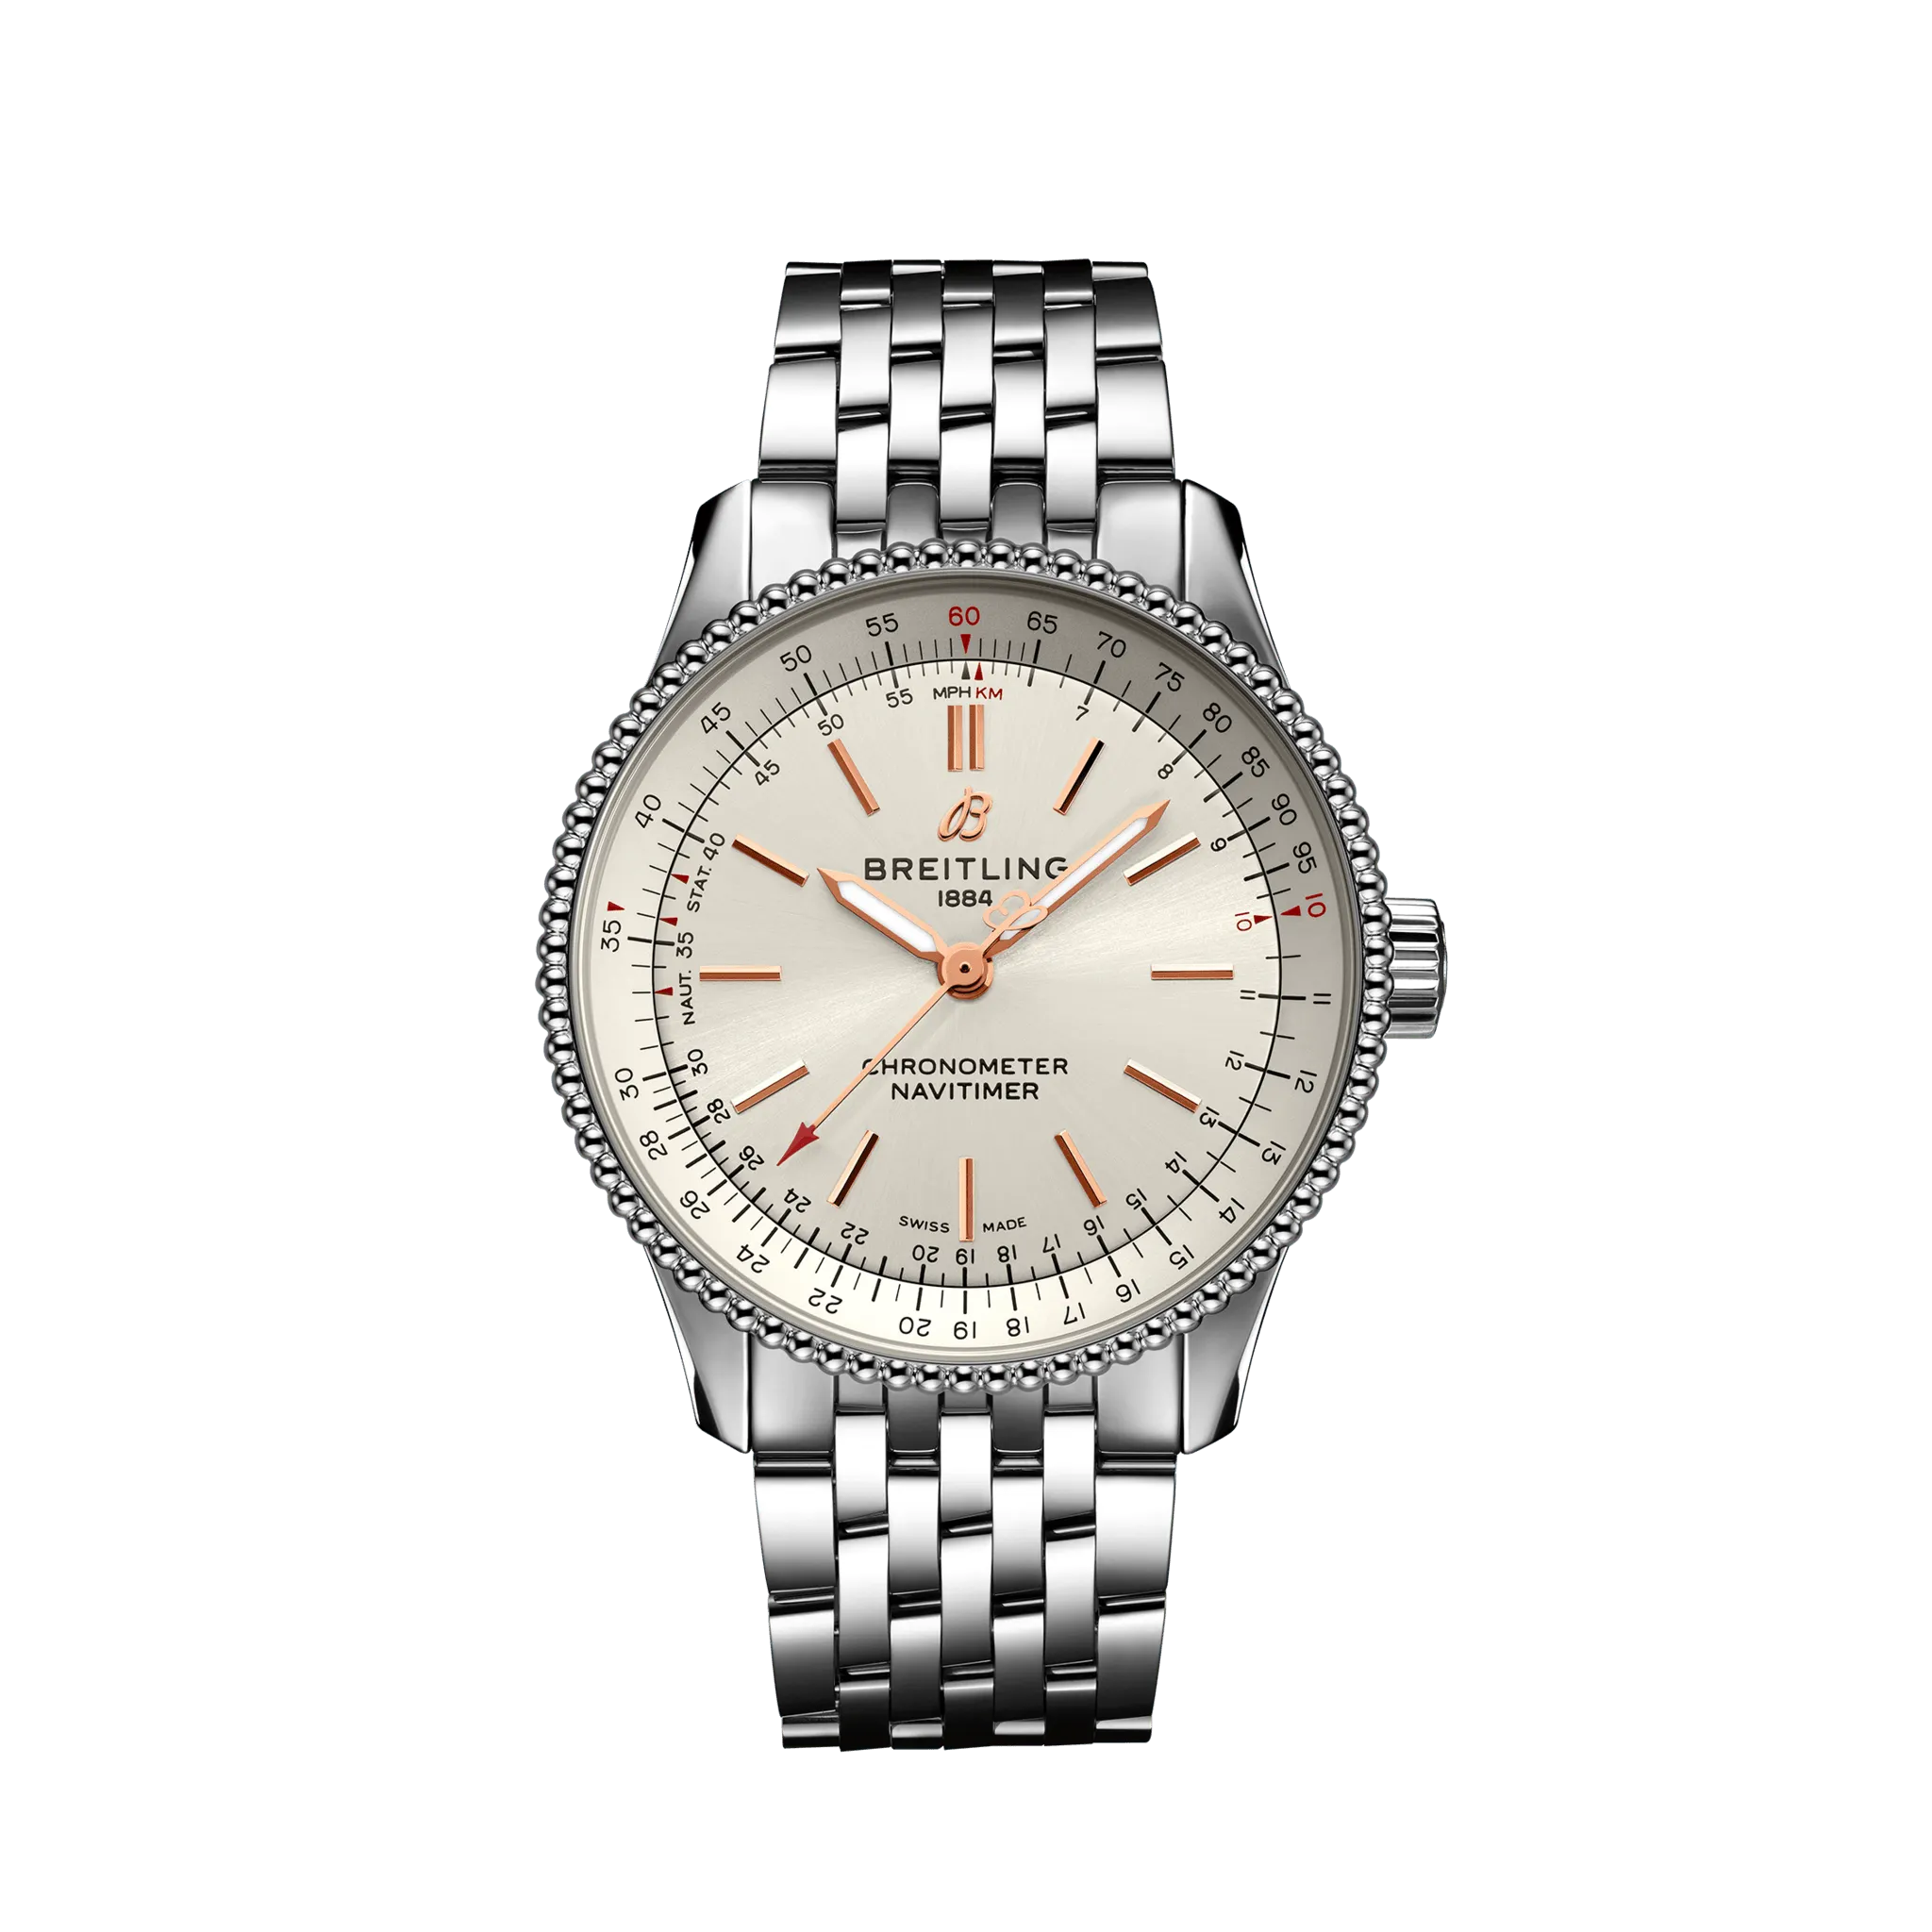 Breitling Watches: Our Top Picks